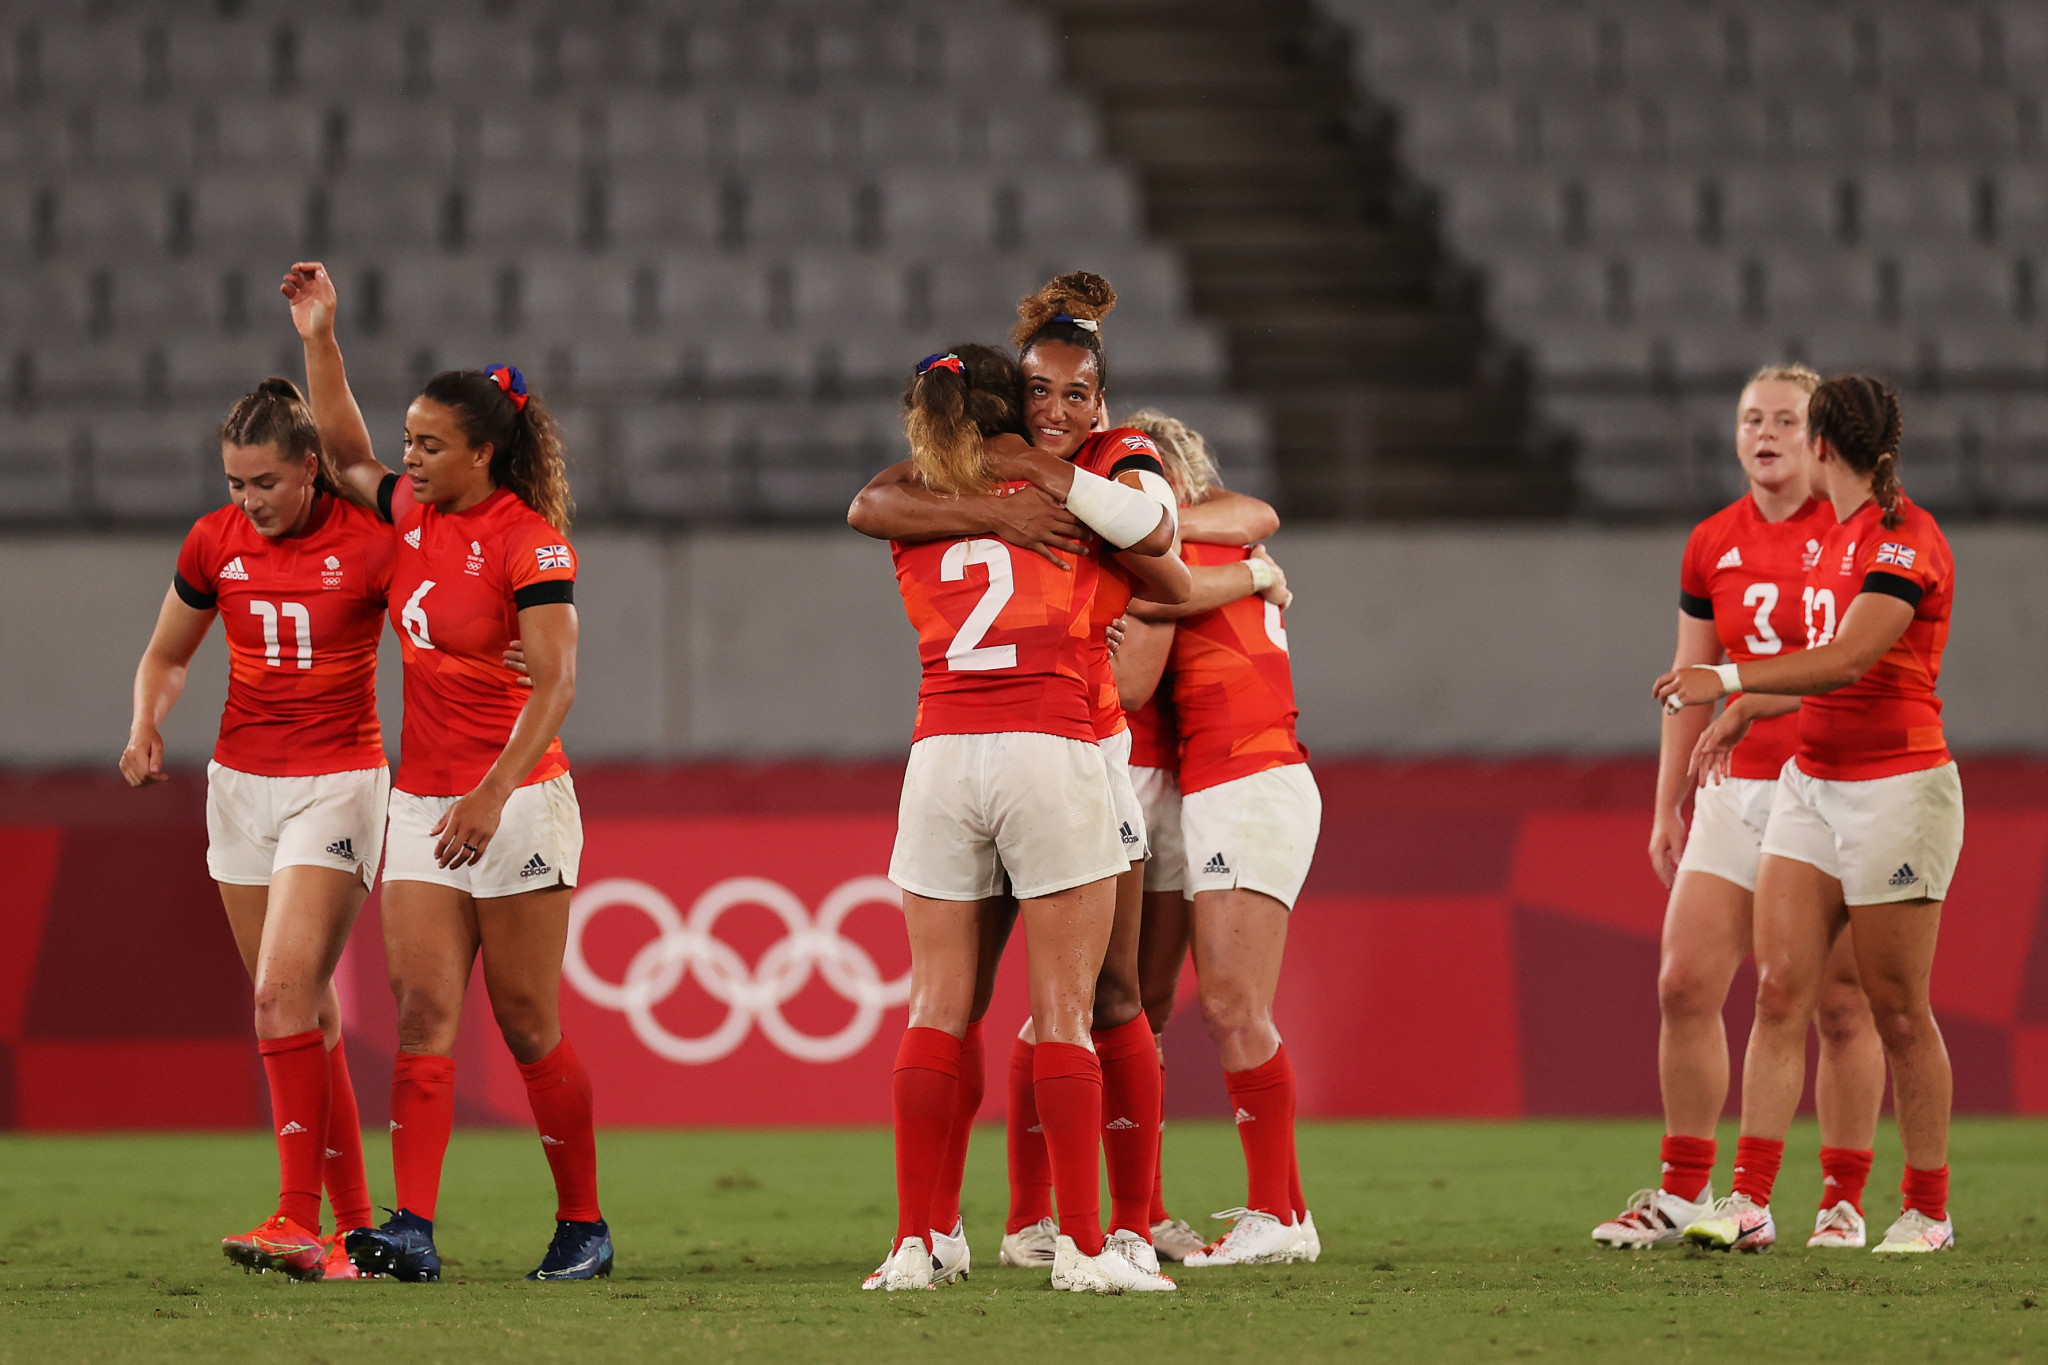 The top four women's and men's teams on this season's Sevens Series will qualify for the next Olympic Games ©Getty Images